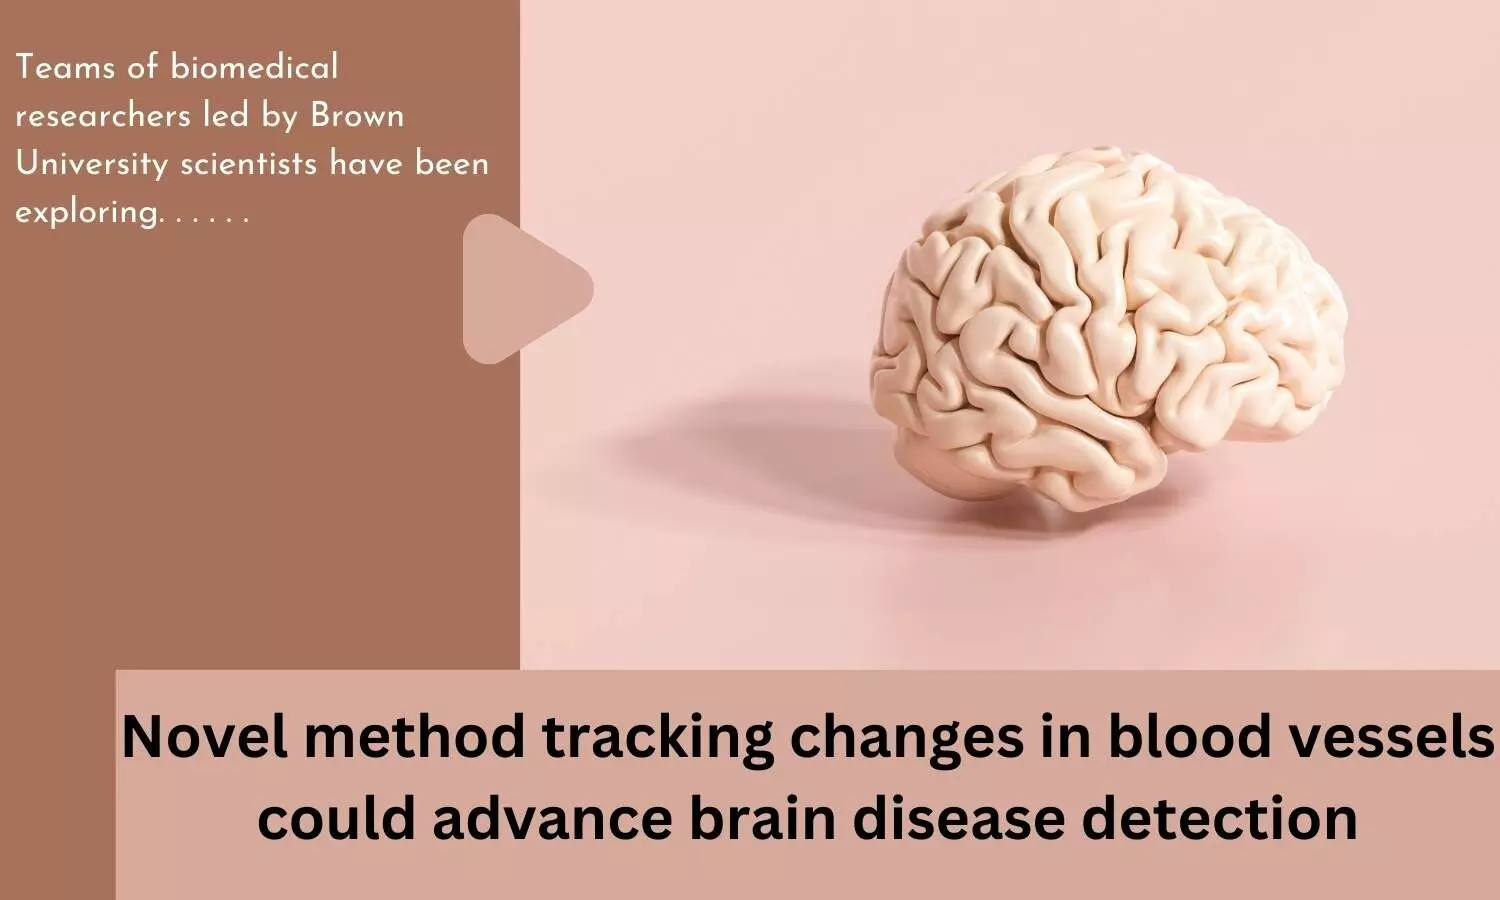 Novel method tracking changes in blood vessels could advance brain disease detection